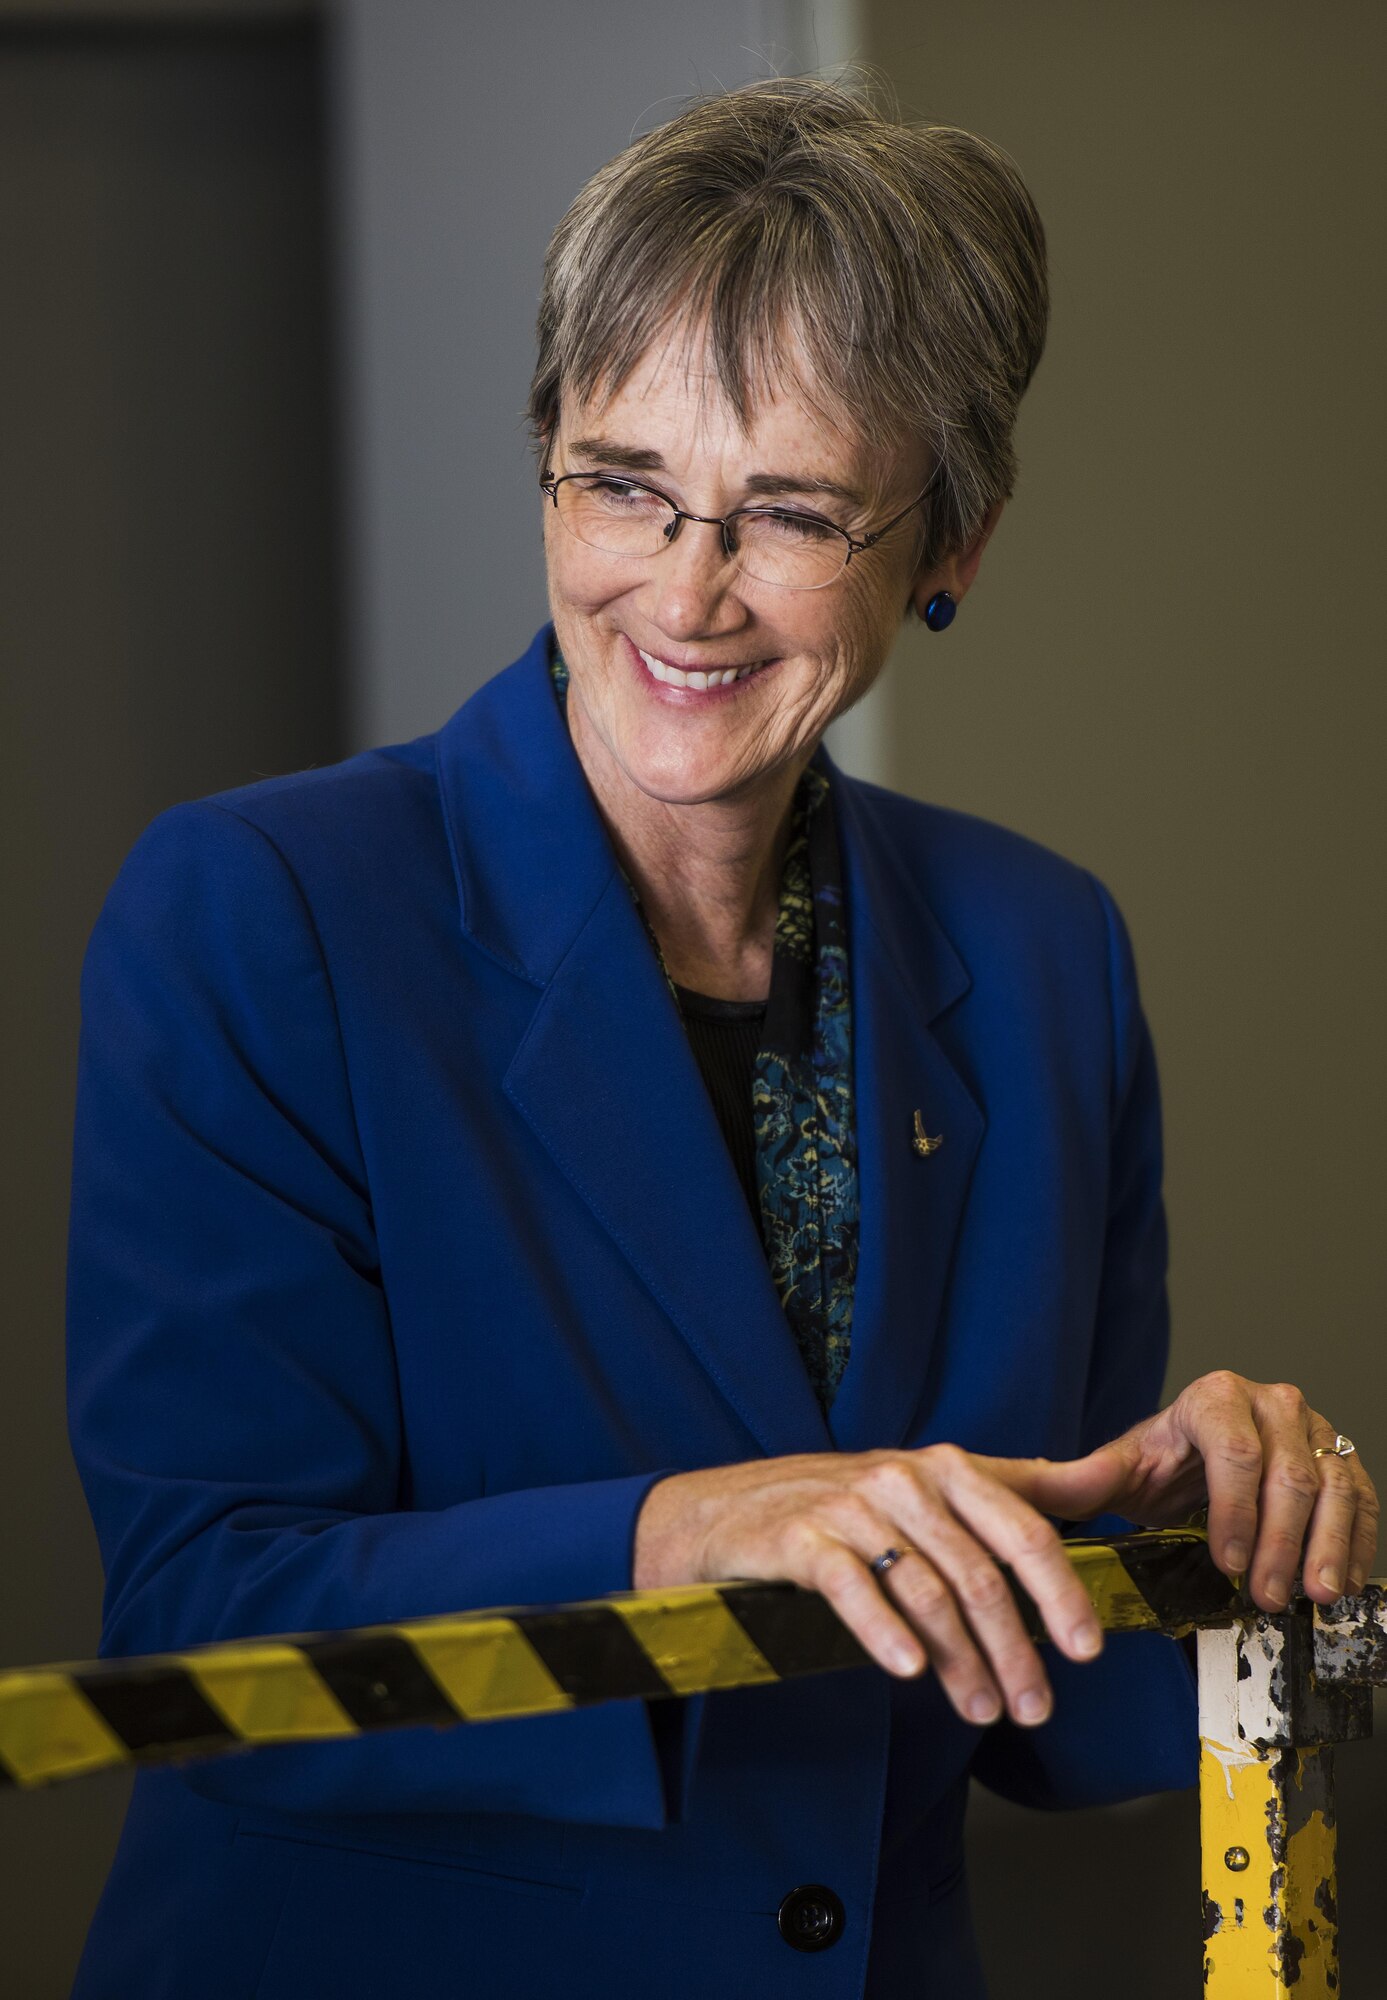 Secretary of the Air Force Heather Wilson tours a 705th Munitions Squadron facility at Minot Air Force Base, N.D., Sept. 7, 2017. During her two-day visit, Wilson toured both 5th Bomb Wing and 91st Missile Wing units and spoke with Airmen emphasizing the importance of the nuclear deterrence mission.(U.S. Air Force photo/Senior Airman J.T. Armstrong)